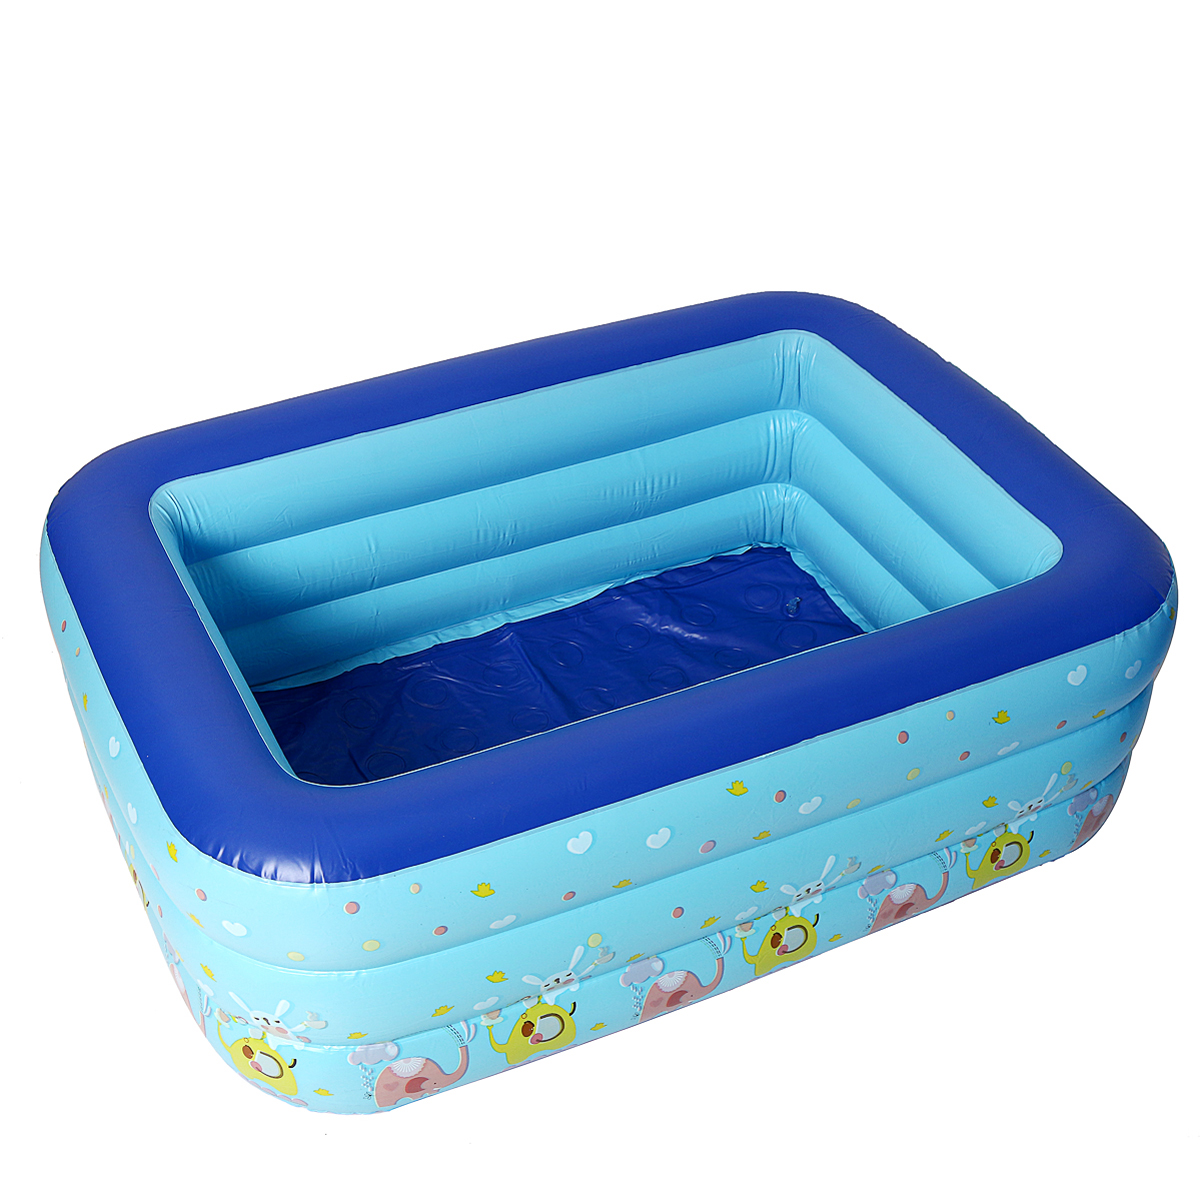 1-4-Persons-Inflatable-Swimming-Pool-Outdoor-Summer-Inflatable-Pool-Air-Pump-for-Children-Adult-1710979-3